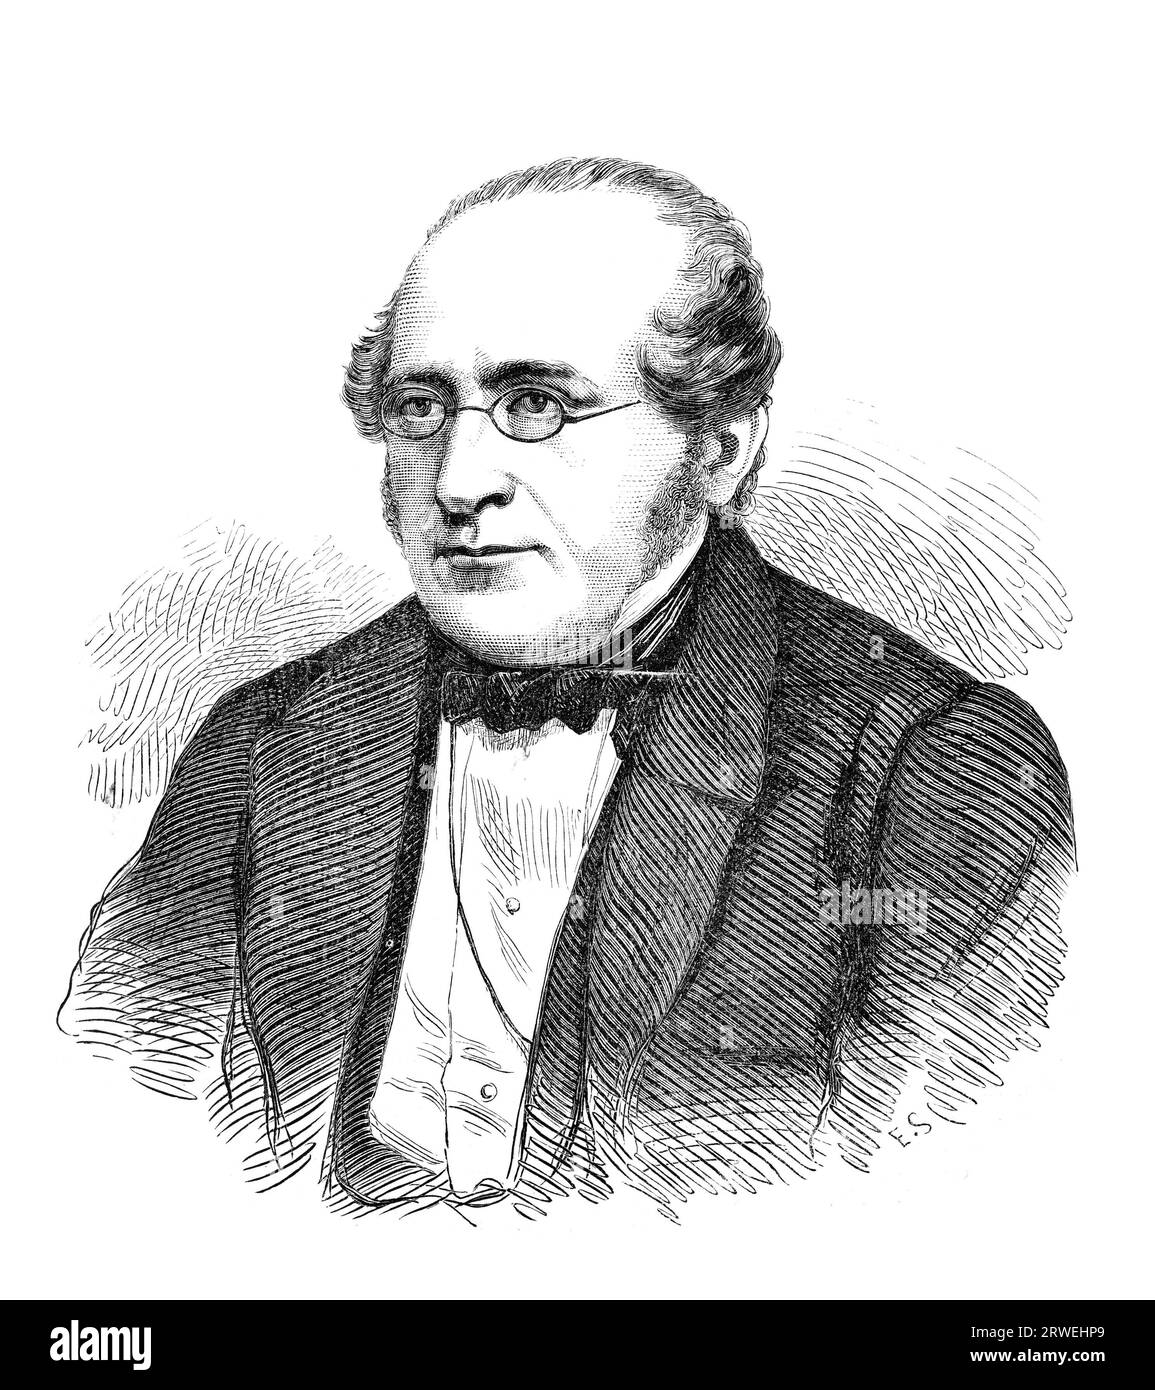 Scholler Parelius Vilhelm Birkedal (1809-1892), Danish priest and writer. Old engraving from a magazine printed in 1866 Stock Photo